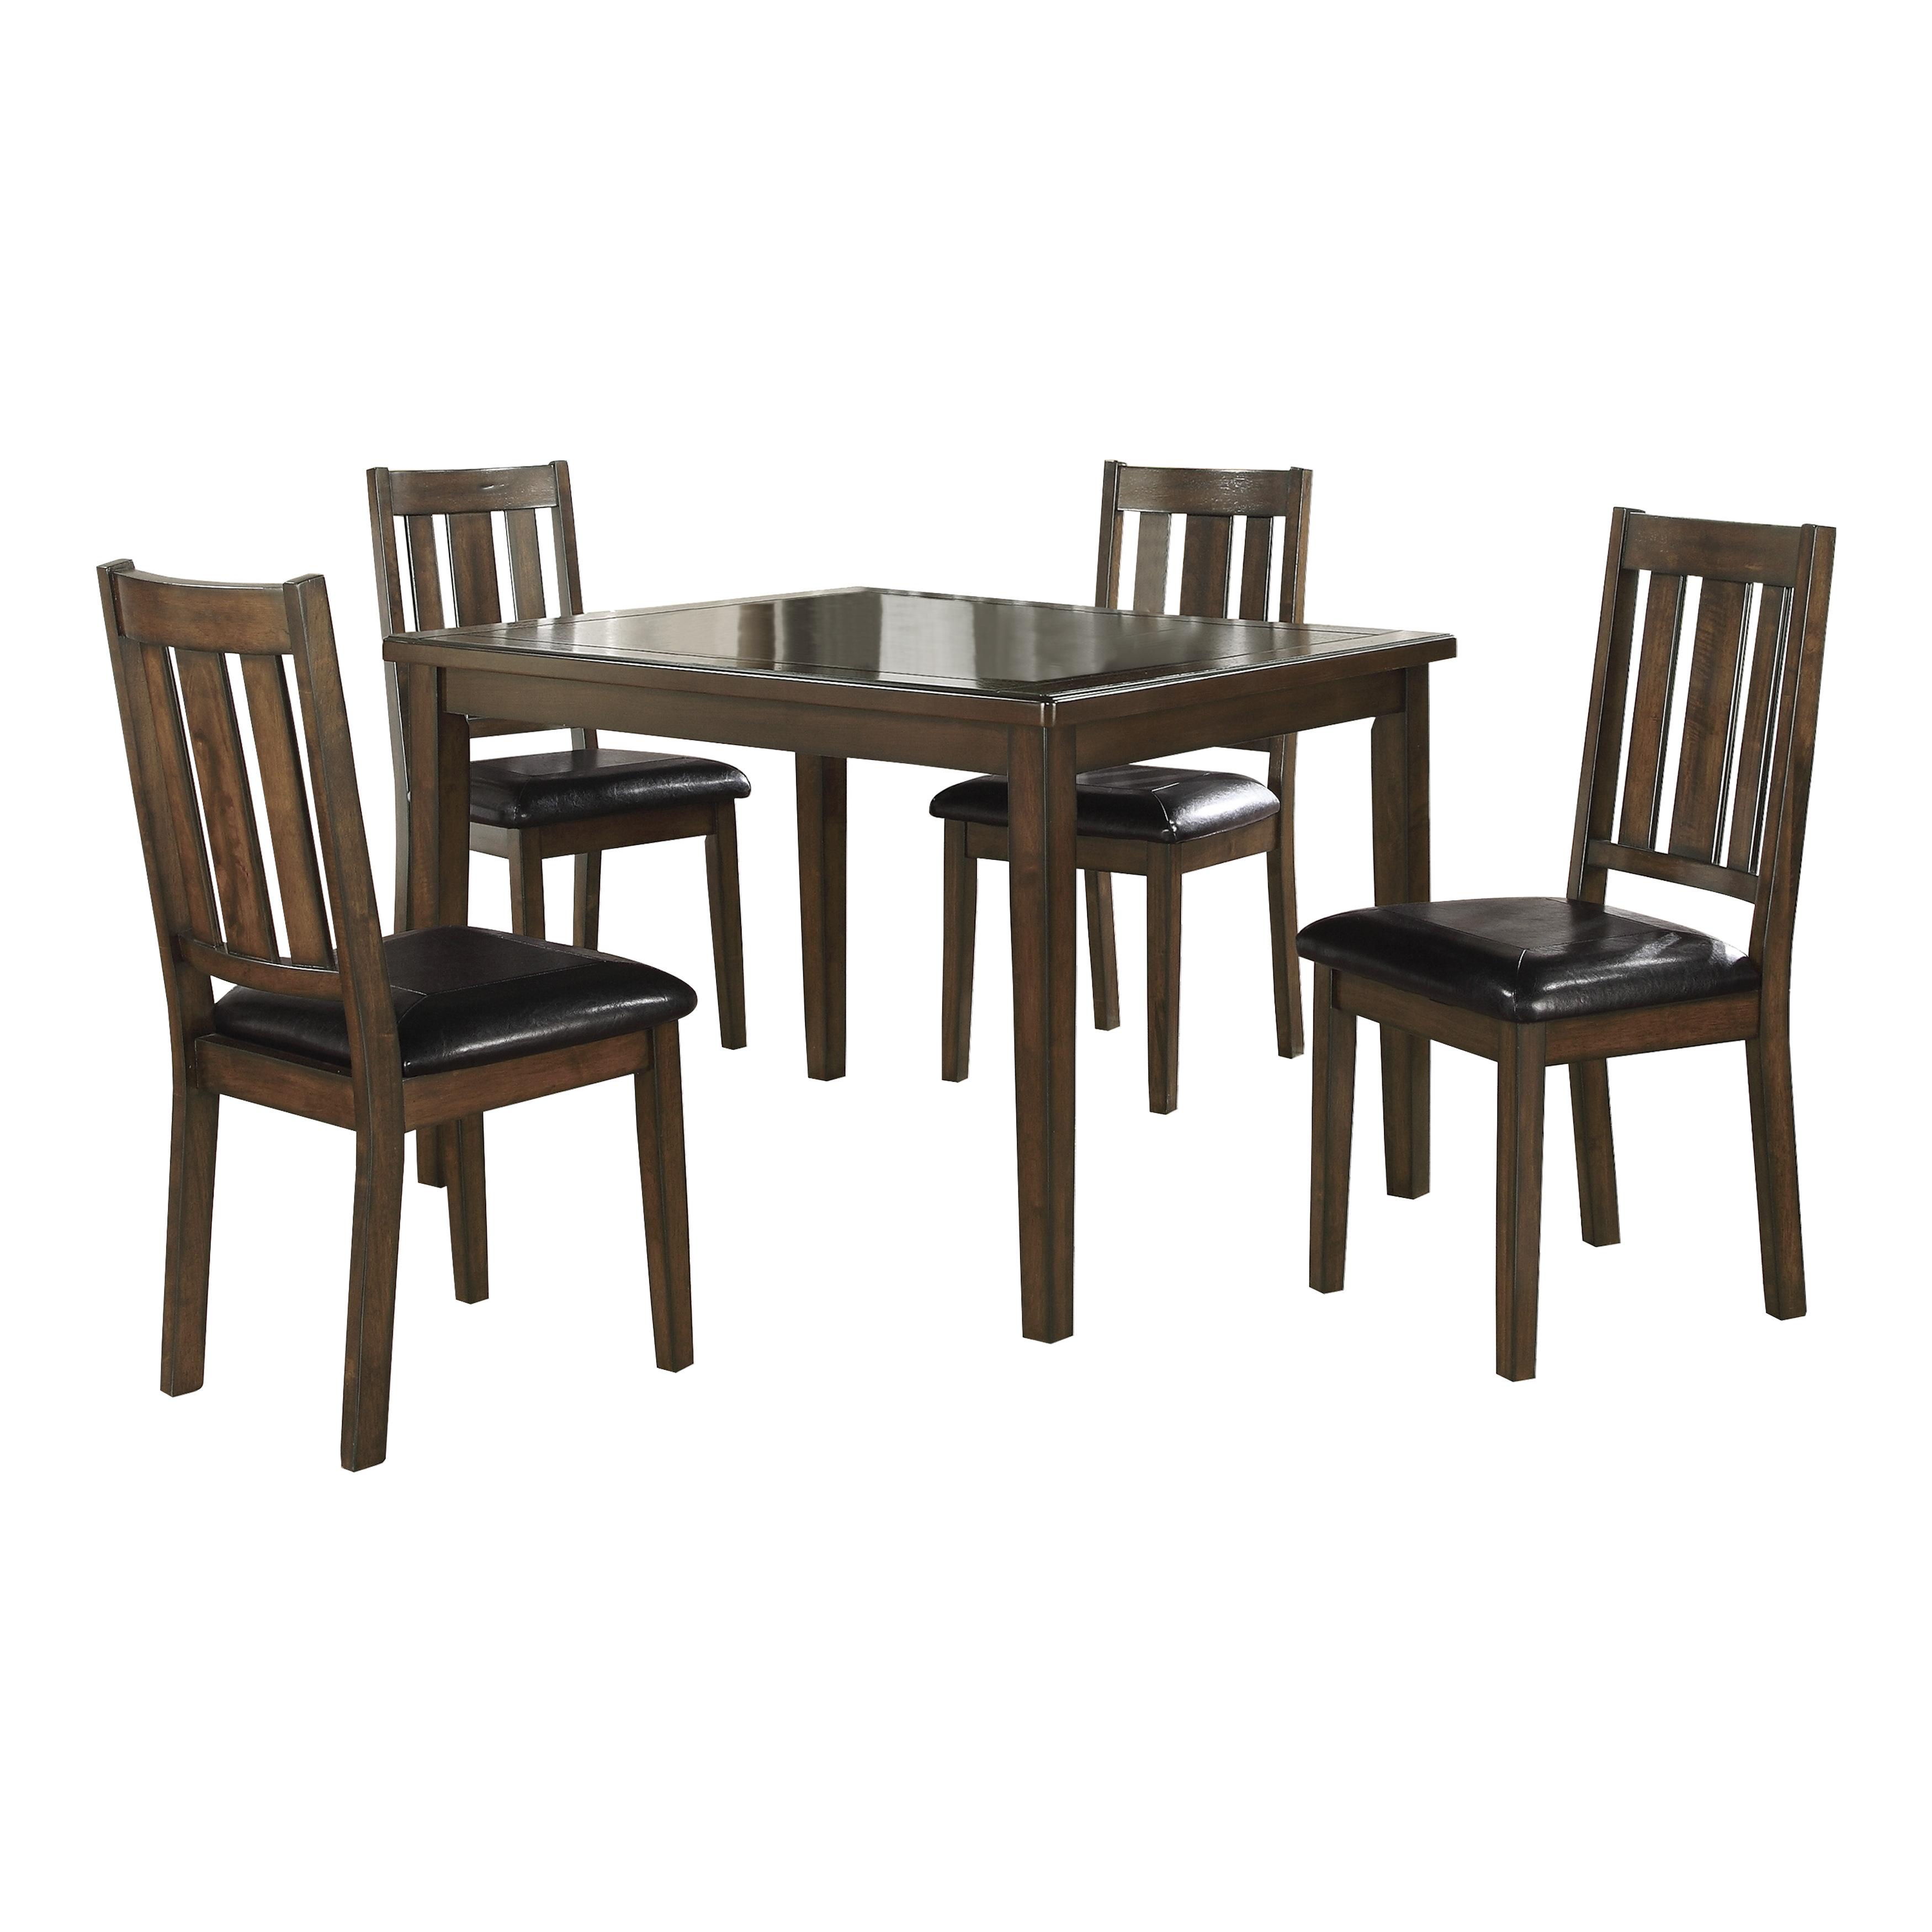 Transitional Dining Room Set 5103 Mosely 5103 in Cherry Faux Leather